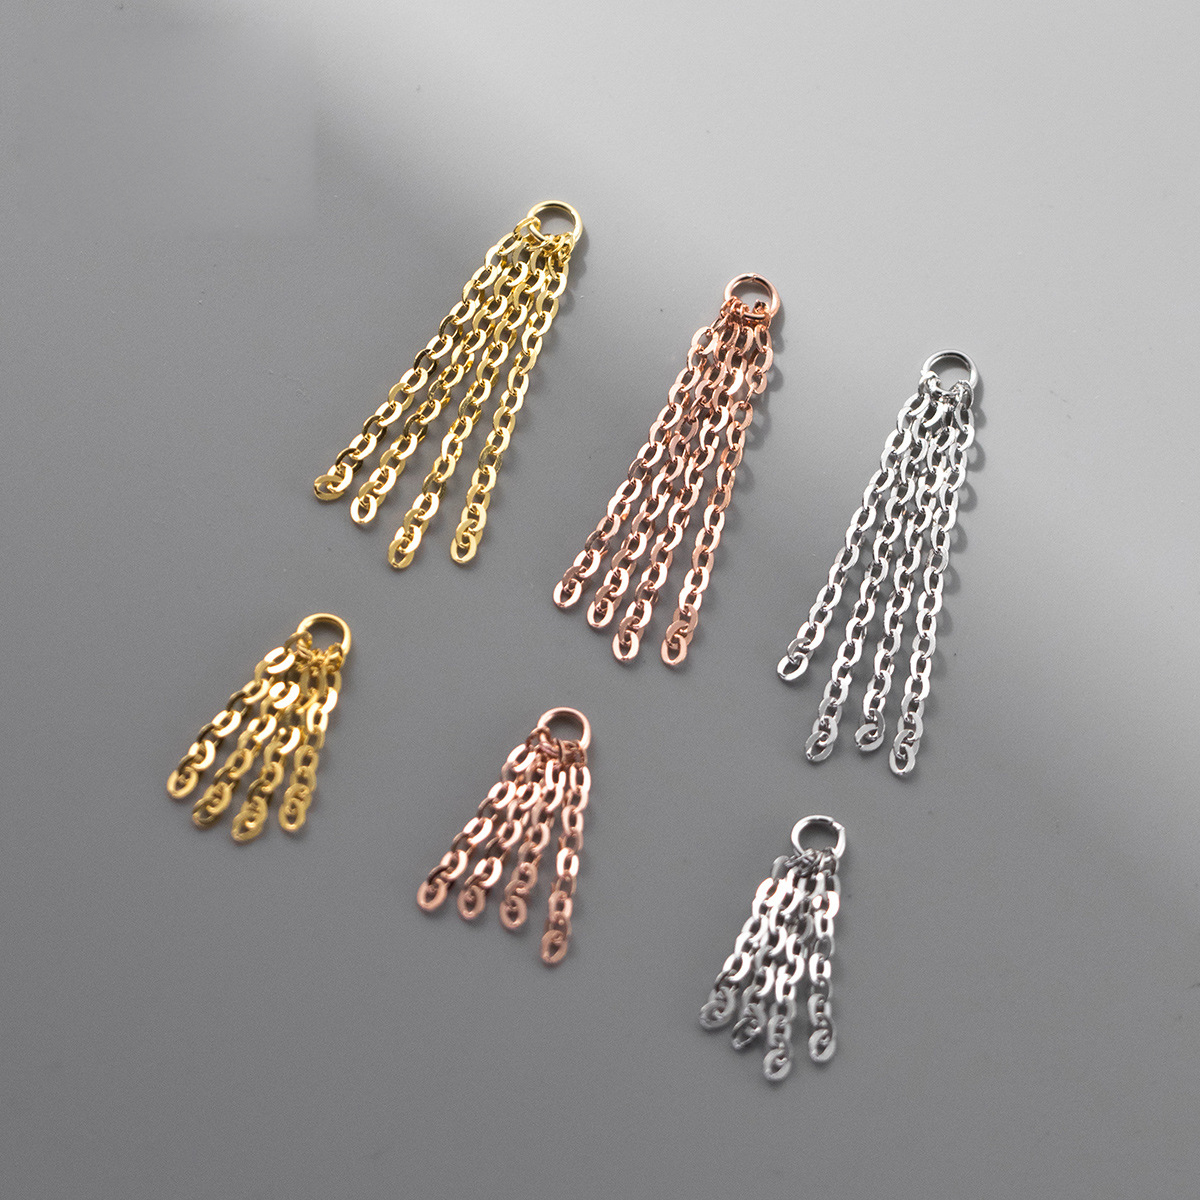 Electroplated platinum, 25 mm long